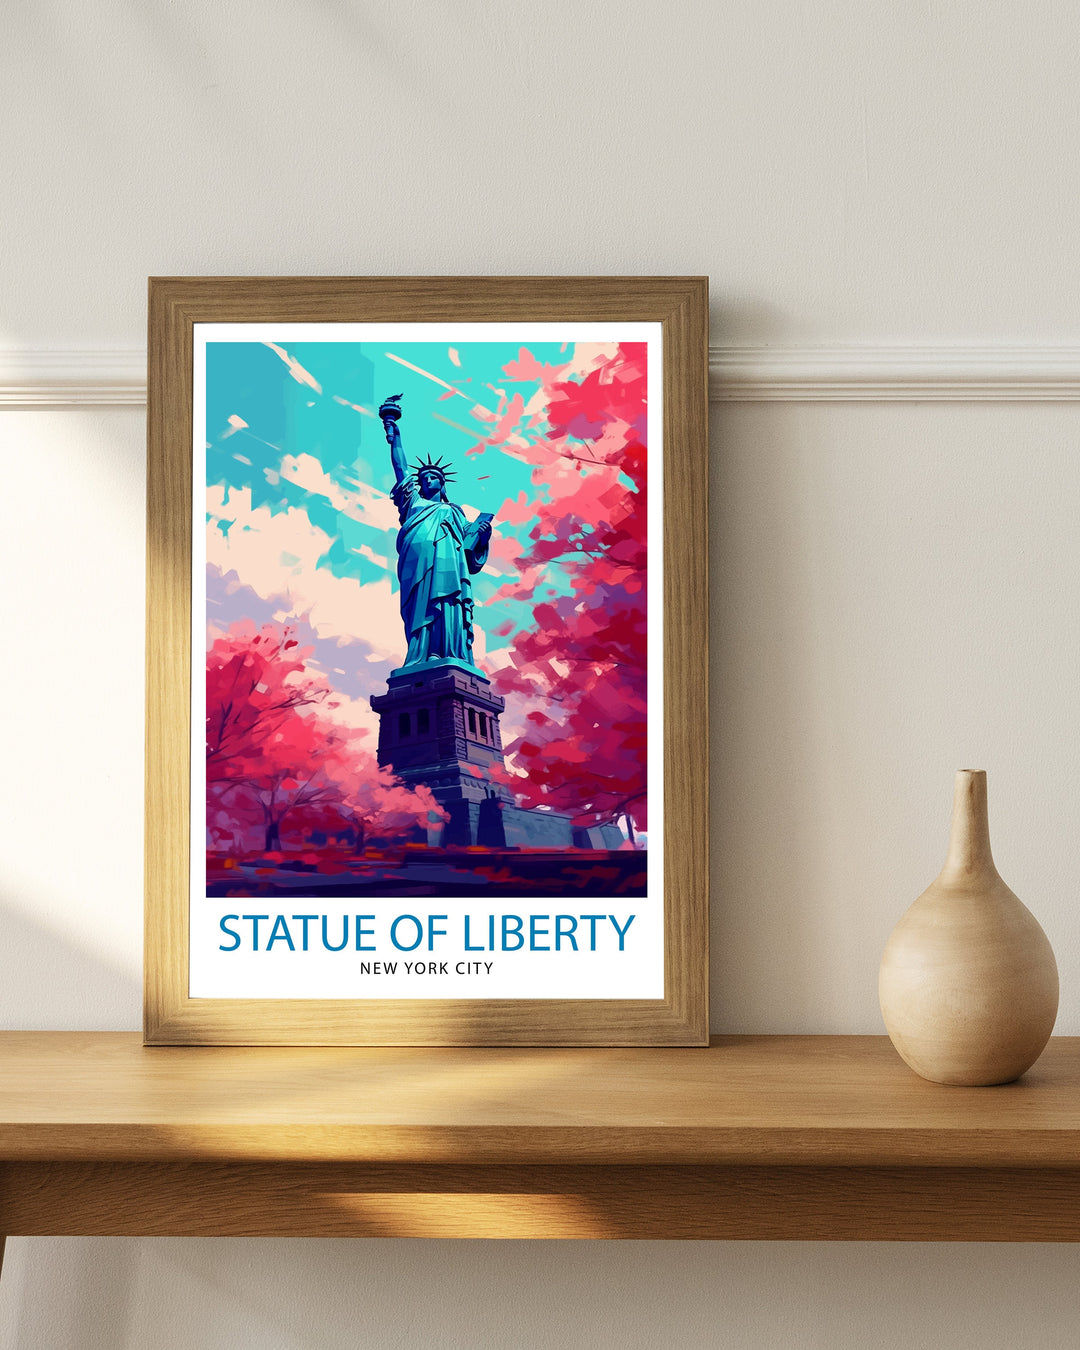 Statue of Liberty Travel Poster New York Wall Decor USA Travel Poster Liberty Enlightening the World Statue of Liberty